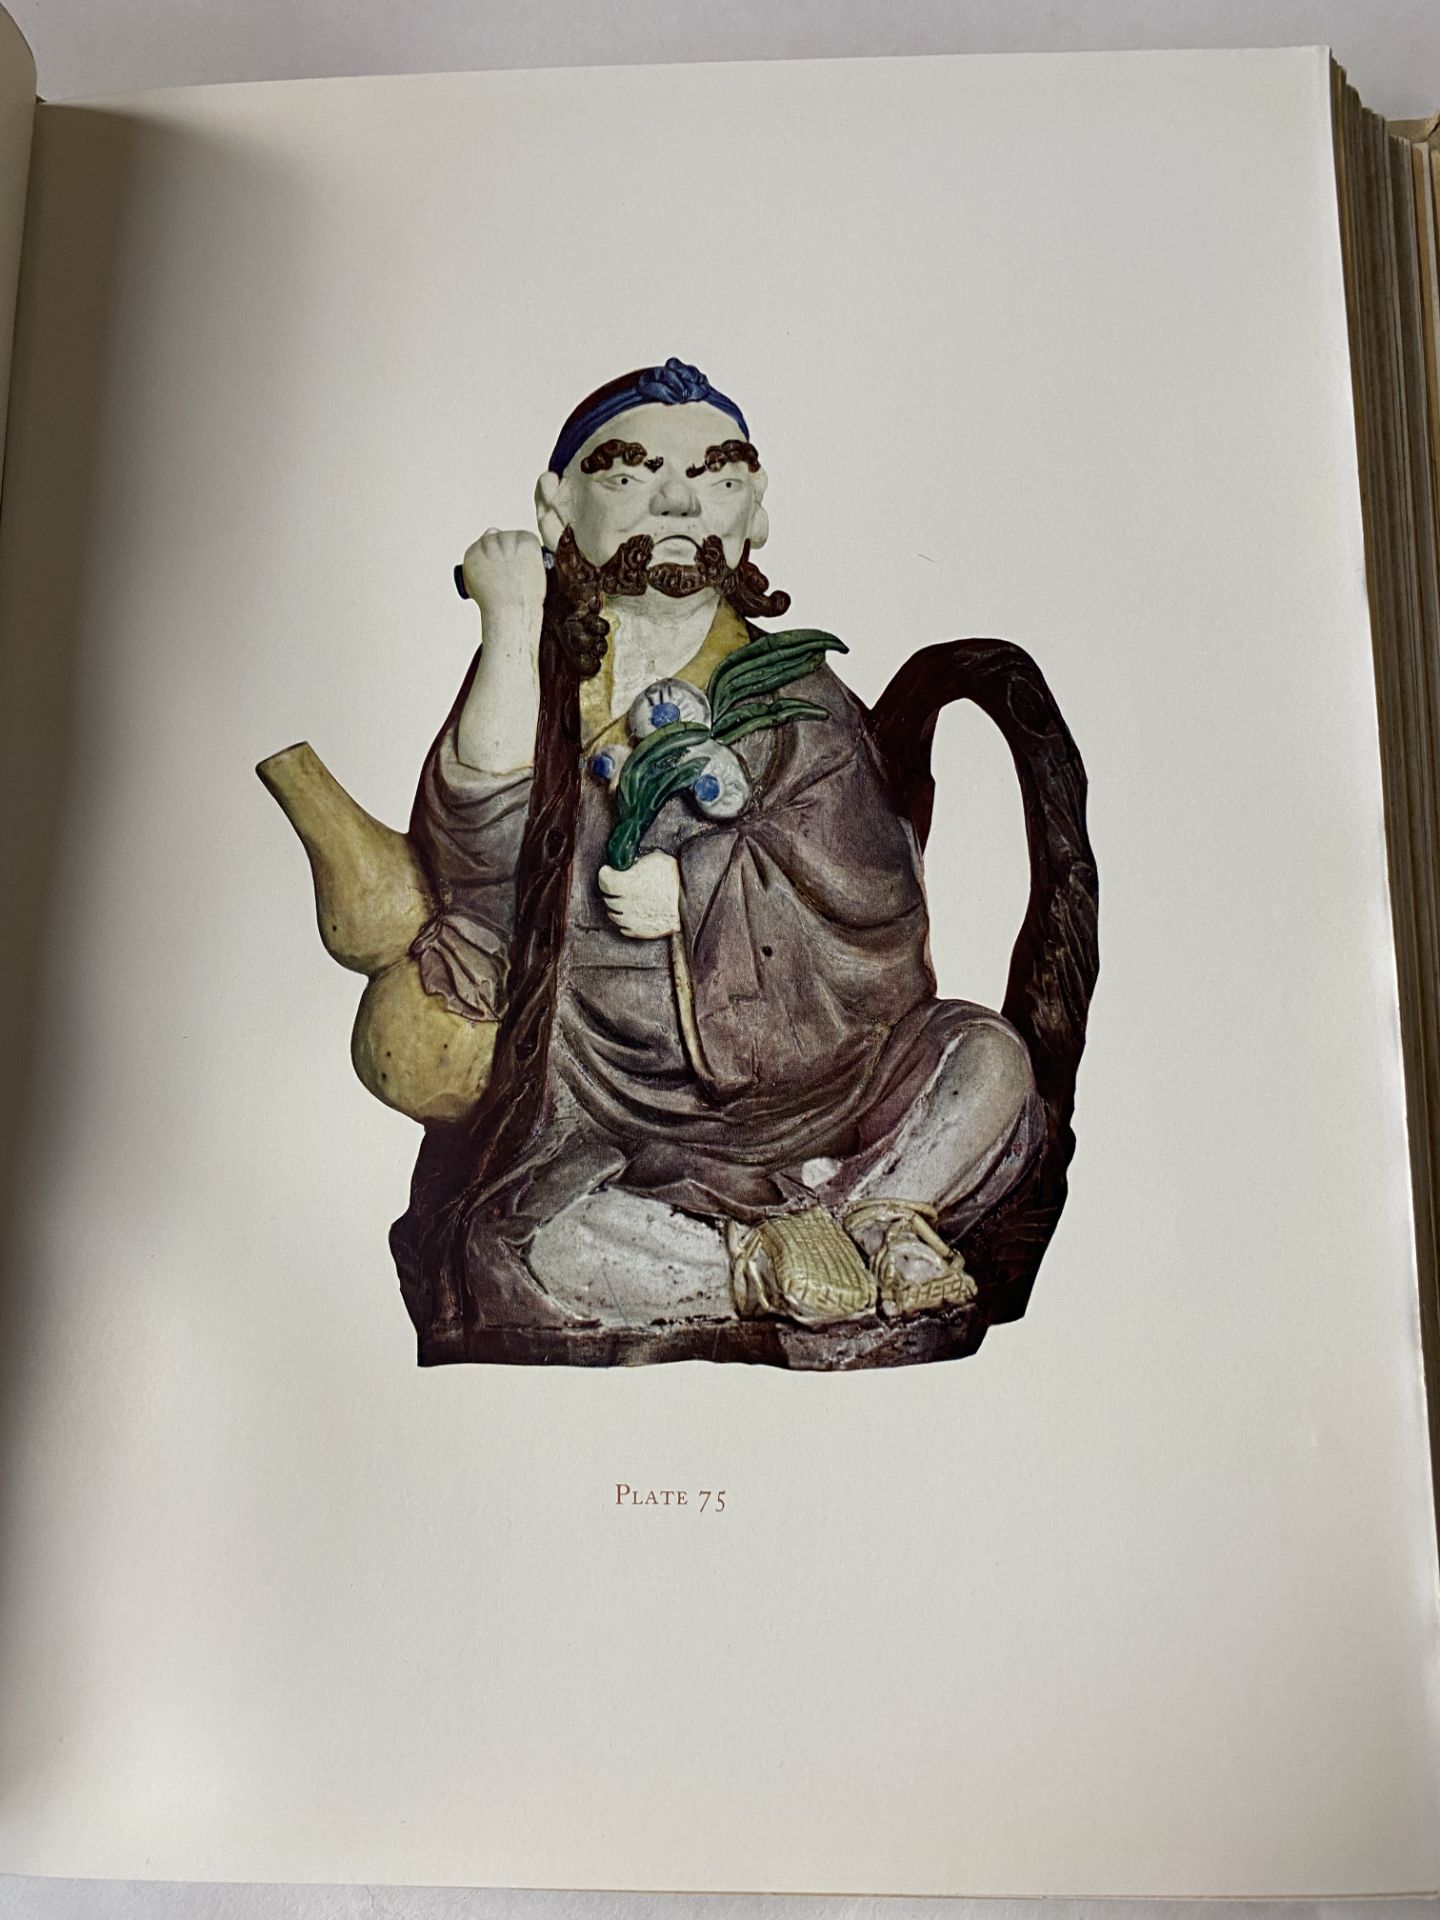 Art Reference Books on Asian Art - Chinese - Image 6 of 10